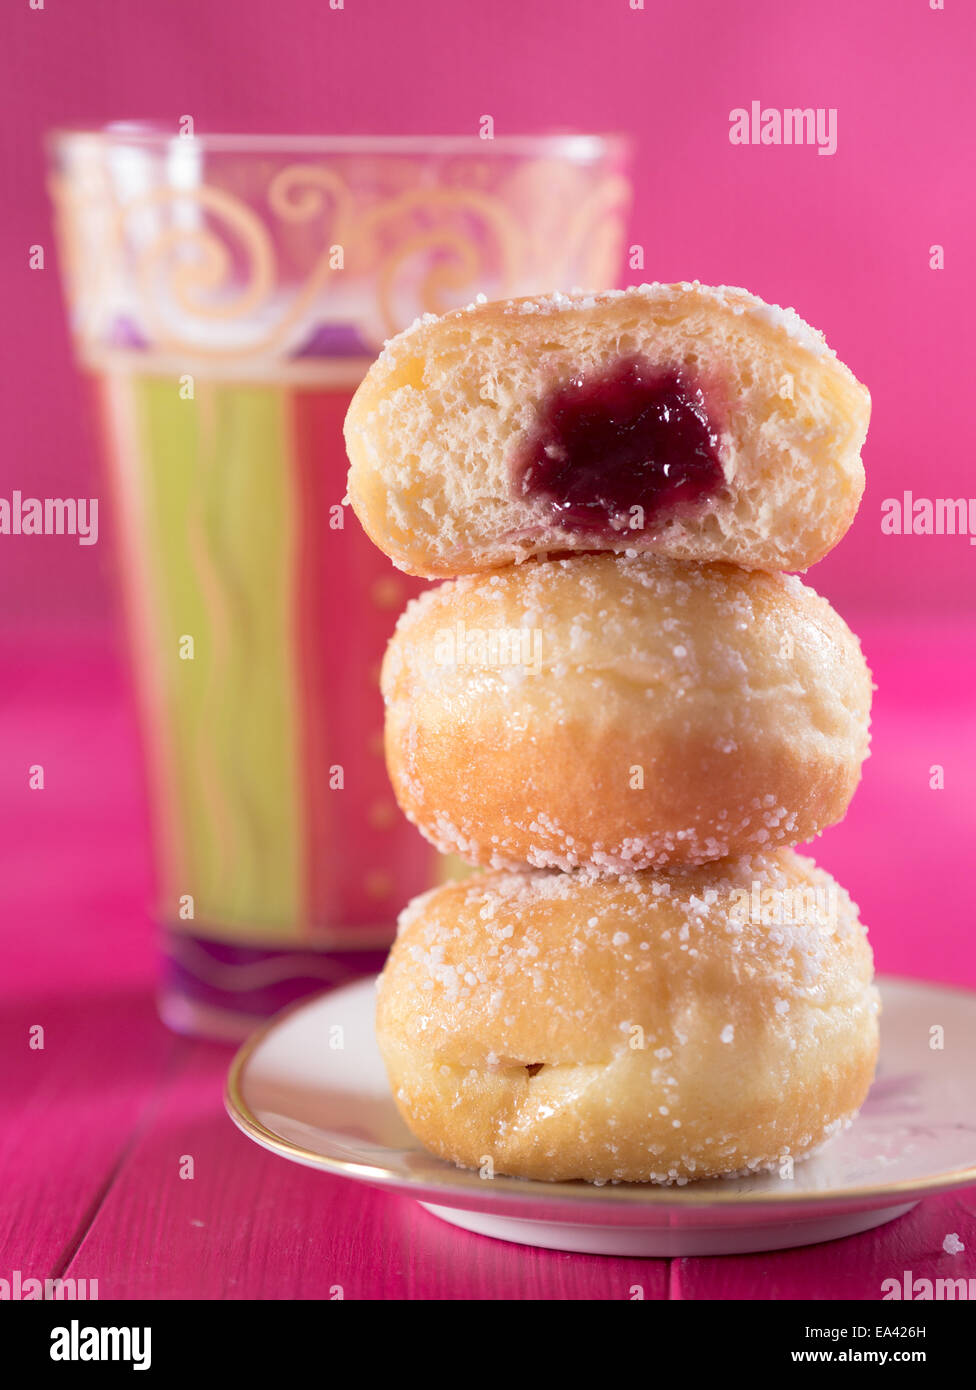 Donuts on a plate Stock Photo